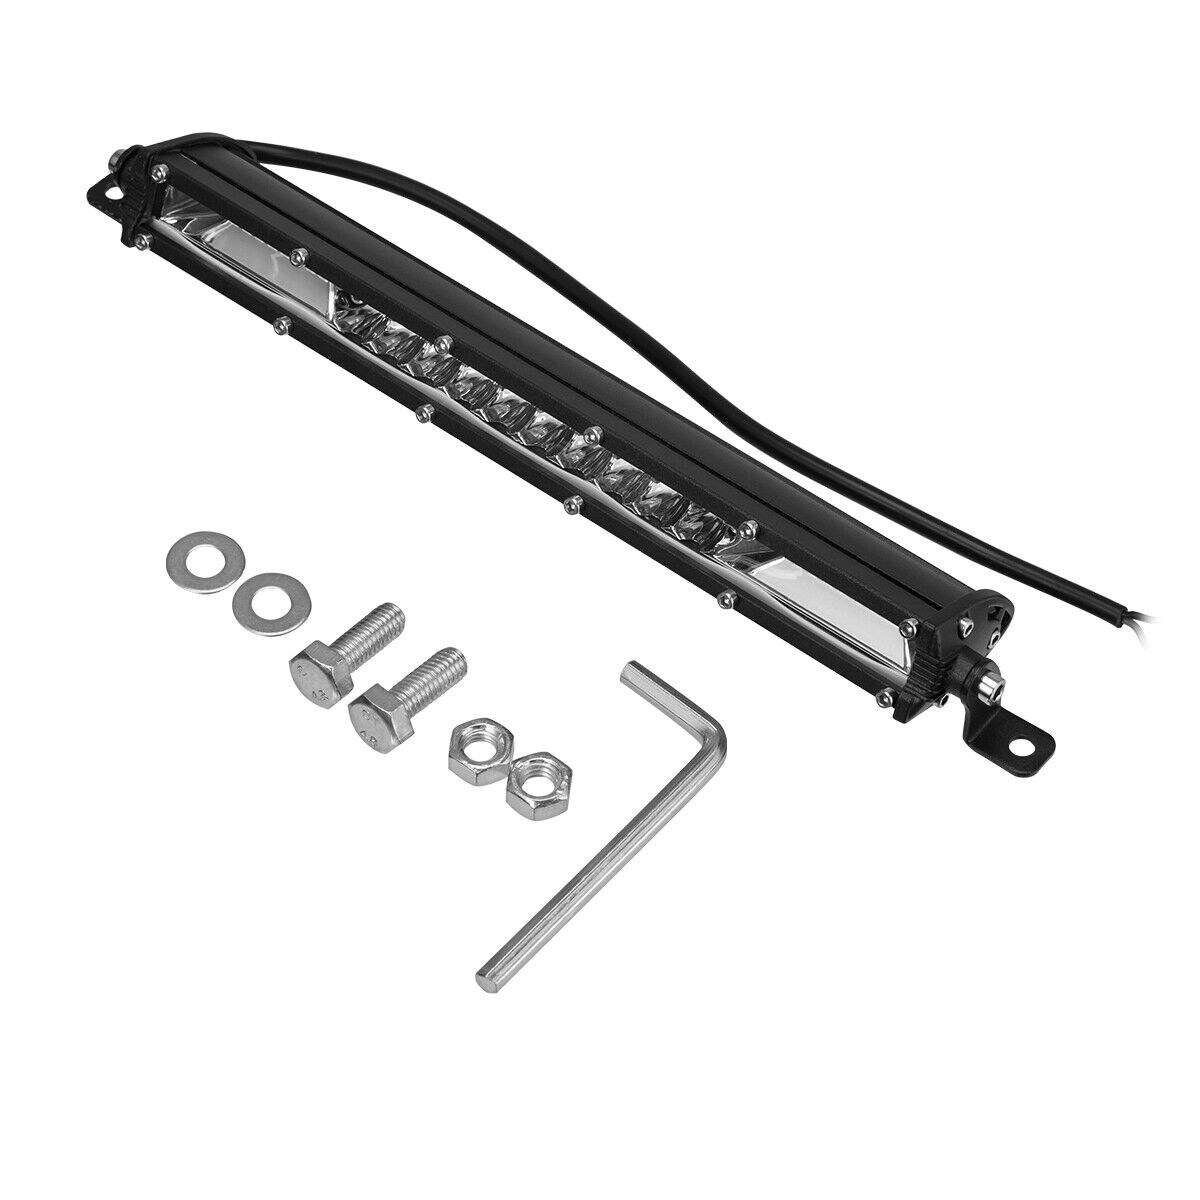 2x 12" inch 450W LED Work Light Bar Combo Spot Flood Driving Off Road SUV Boat Unbranded Does Not Apply - фотография #9